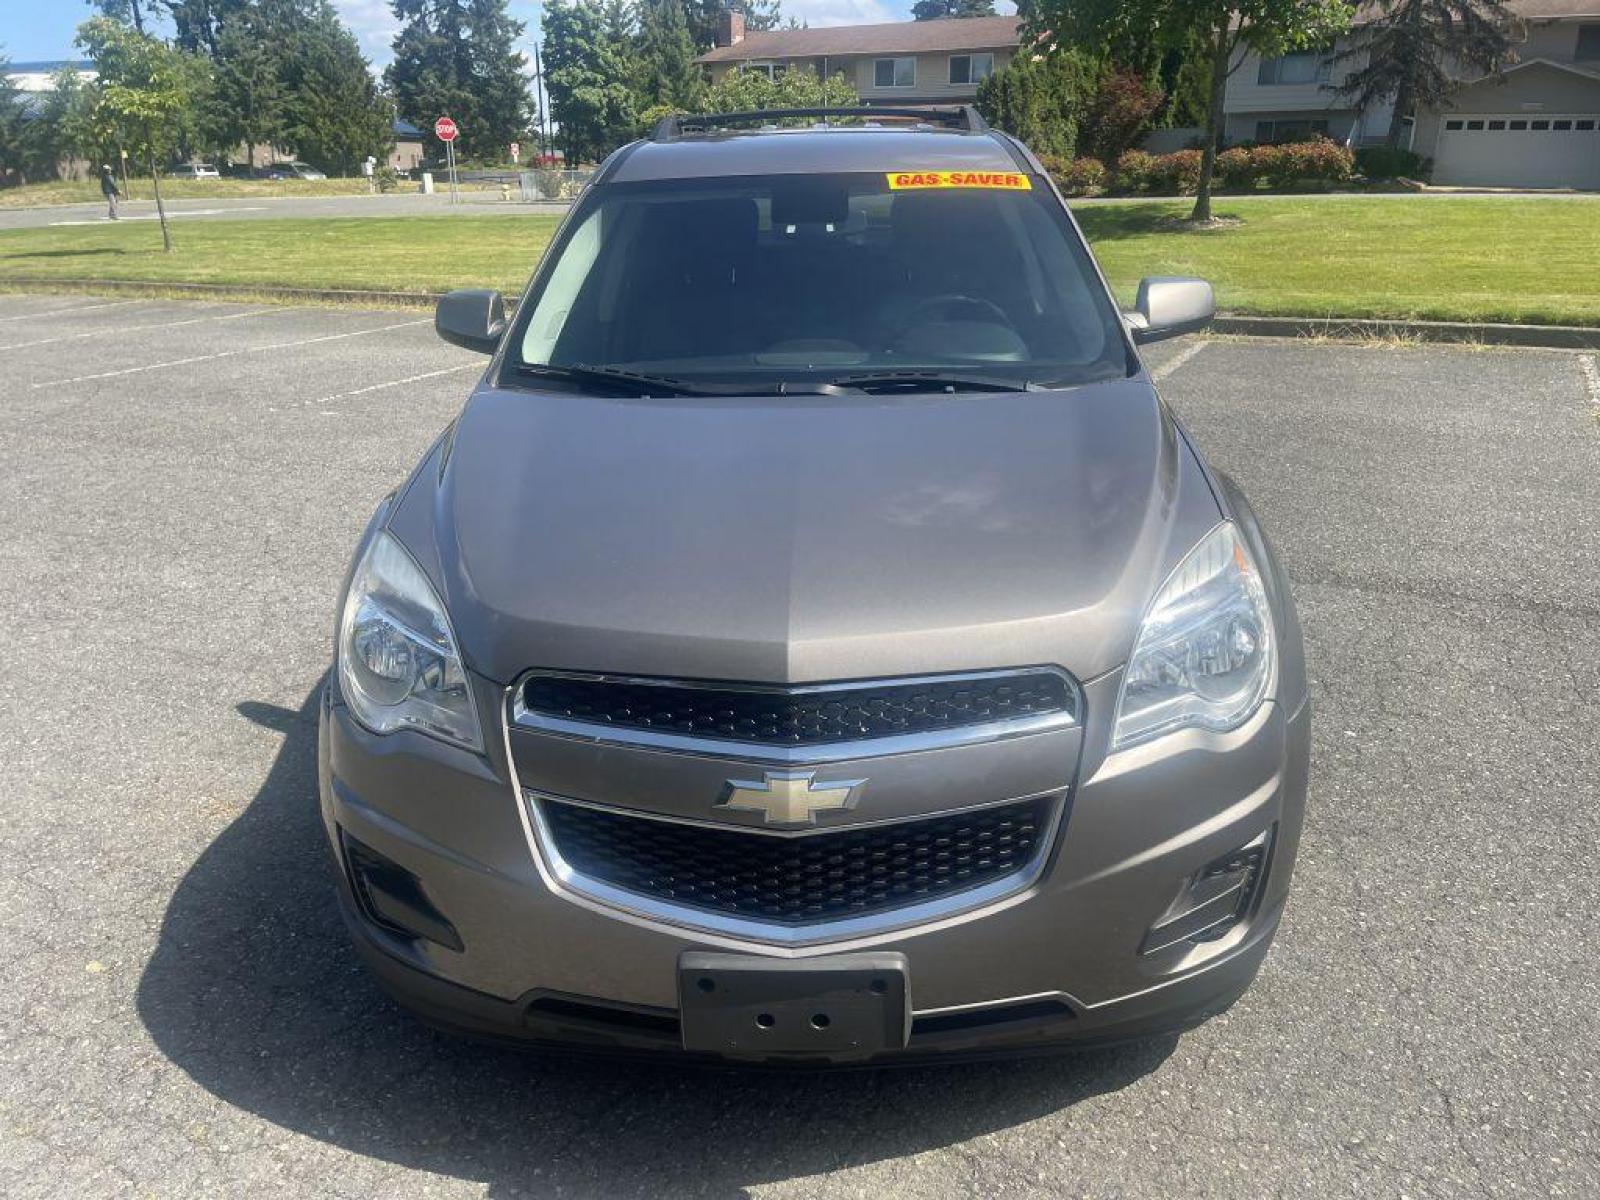 2012 GOLD /BLACK CHEVROLET EQUINOX LT SPRT UTILITY FLEX FUEL (2GNFLEEK2C6) with an 2.4L engine, Automatic transmission, located at 1505 S 356th St., Federal Way, WA, 98003, 47.282051, -122.314781 - Reduced price to $7,999!! Runs great! And will handle wonderful in the rain and PNW weather conditions during fall and winter! This Equinox is a great compact SUV with engaging handling and enough gusto for daily driving, but very good gas mileage with the Flex Fuel package. Very roomy five-sea - Photo #2